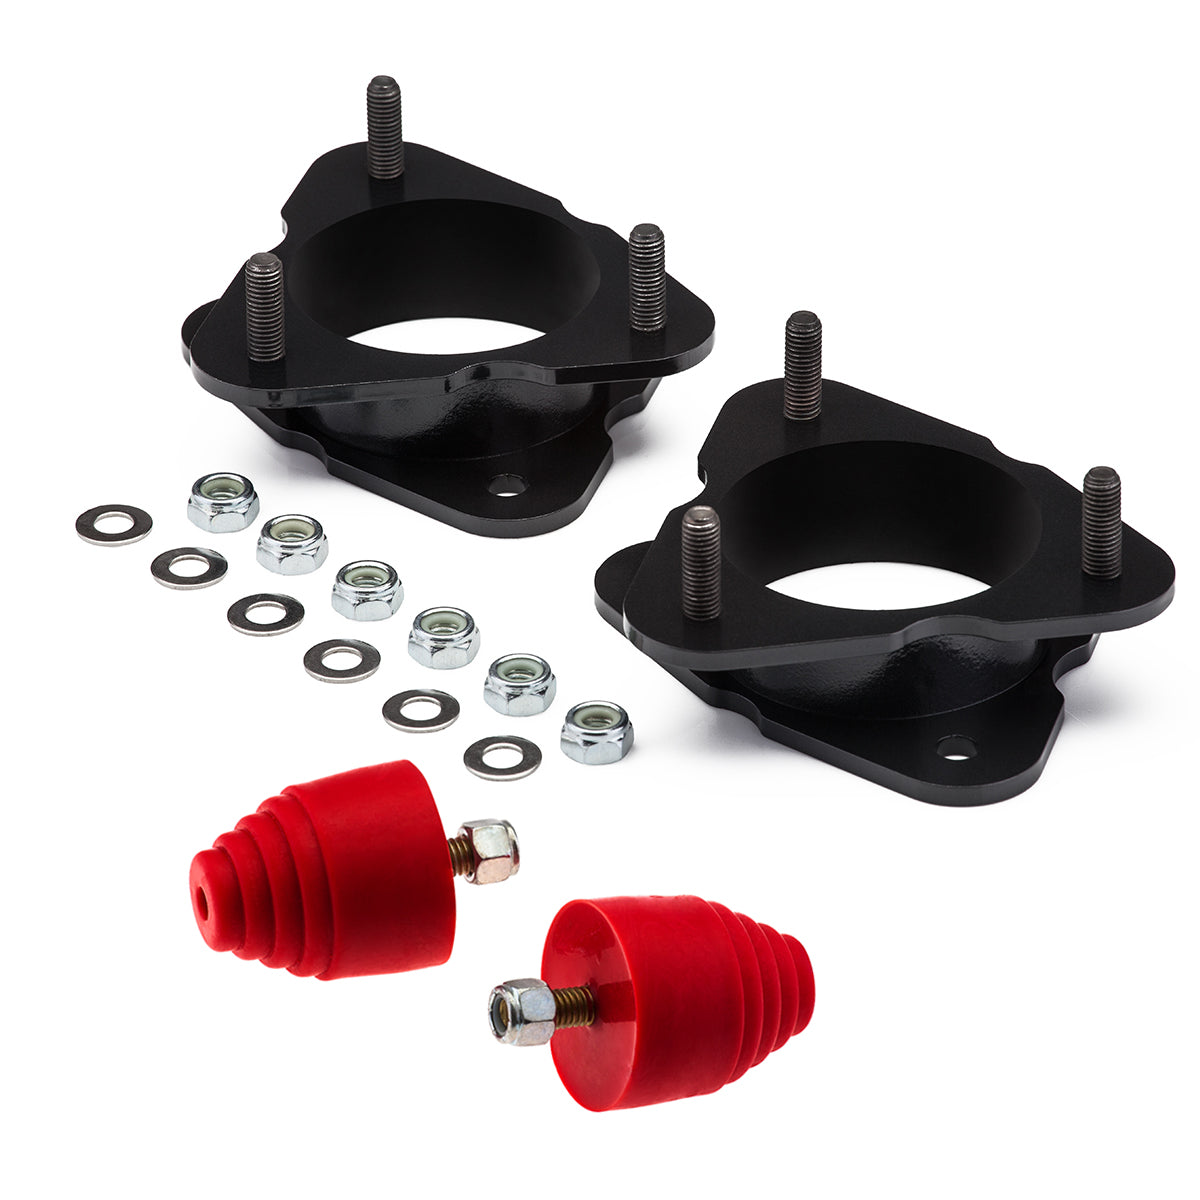 2007-2023 Chevy Silverado 1500 Front Lift Kit with Bump Stops